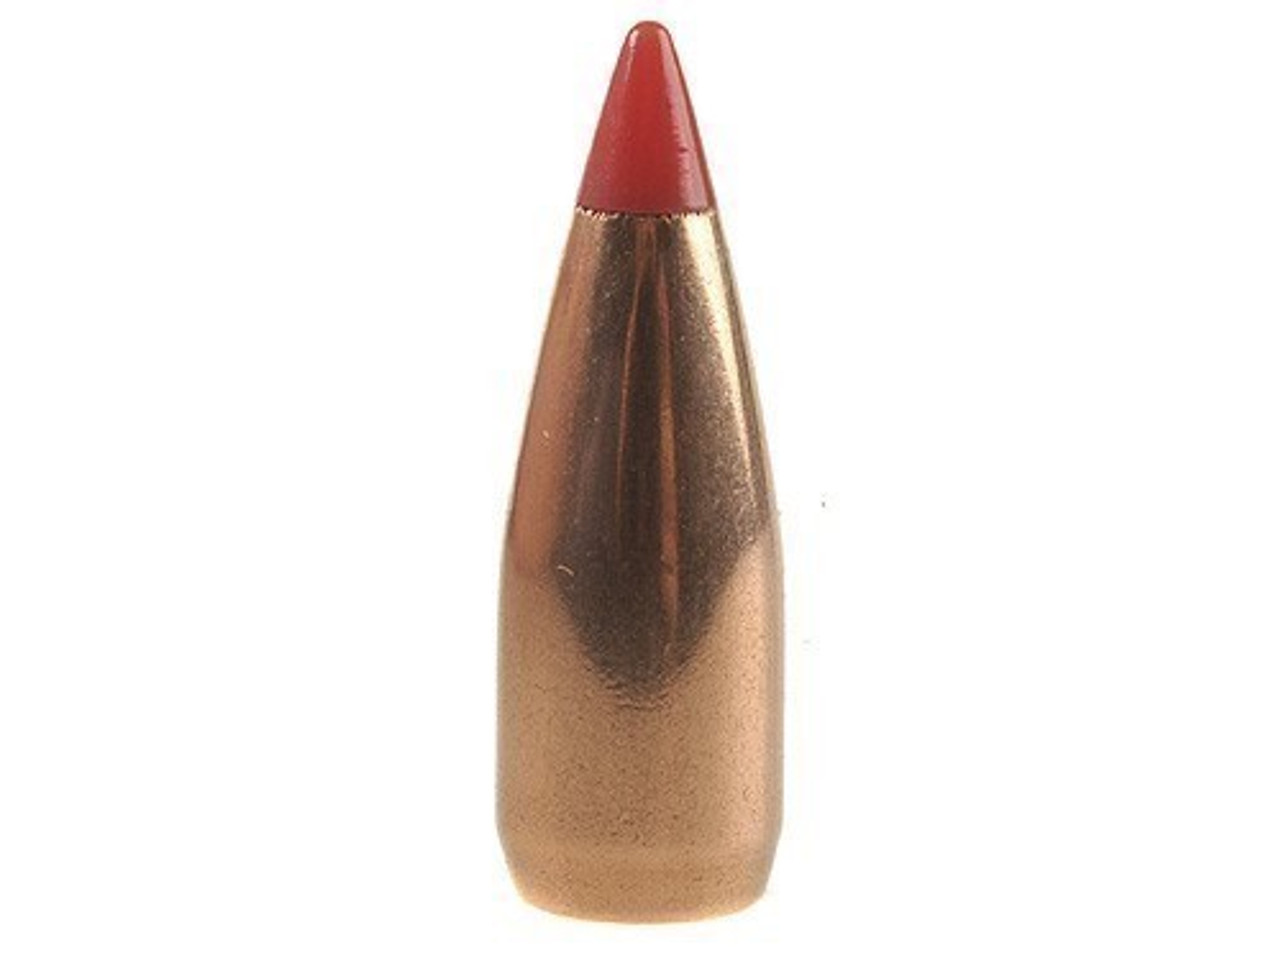 Hornady 22 Cal (.224") Projectiles, 40gr V-Max, Box of 100